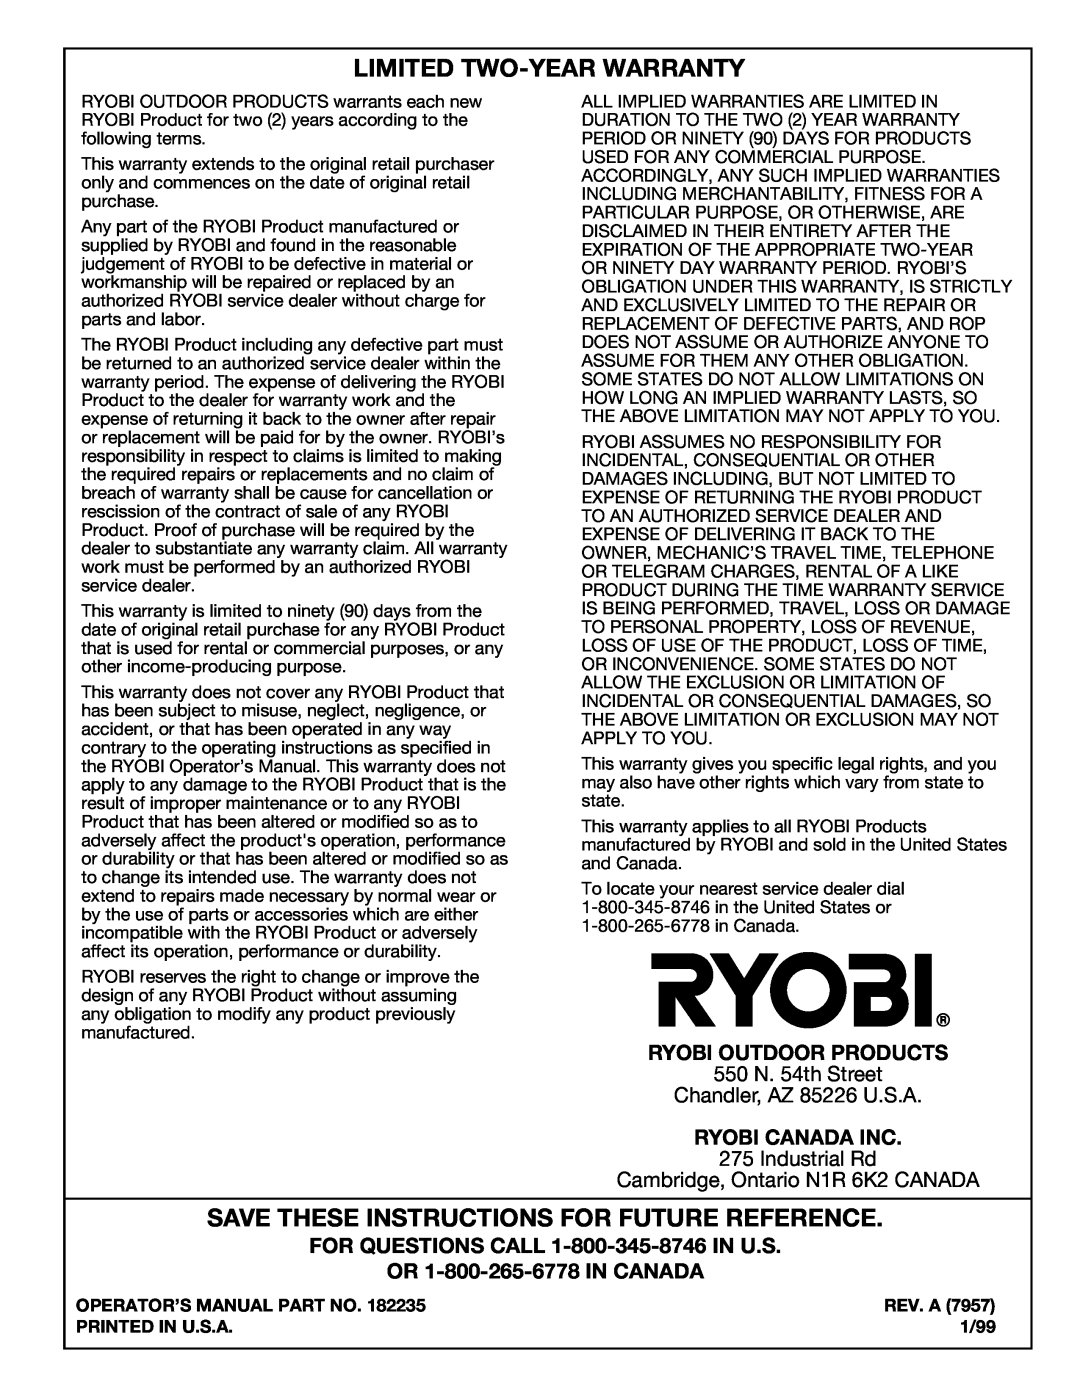 Ryobi LE720r Limited Two-Yearwarranty, Save These Instructions For Future Reference, Ryobi Outdoor Products, Industrial Rd 